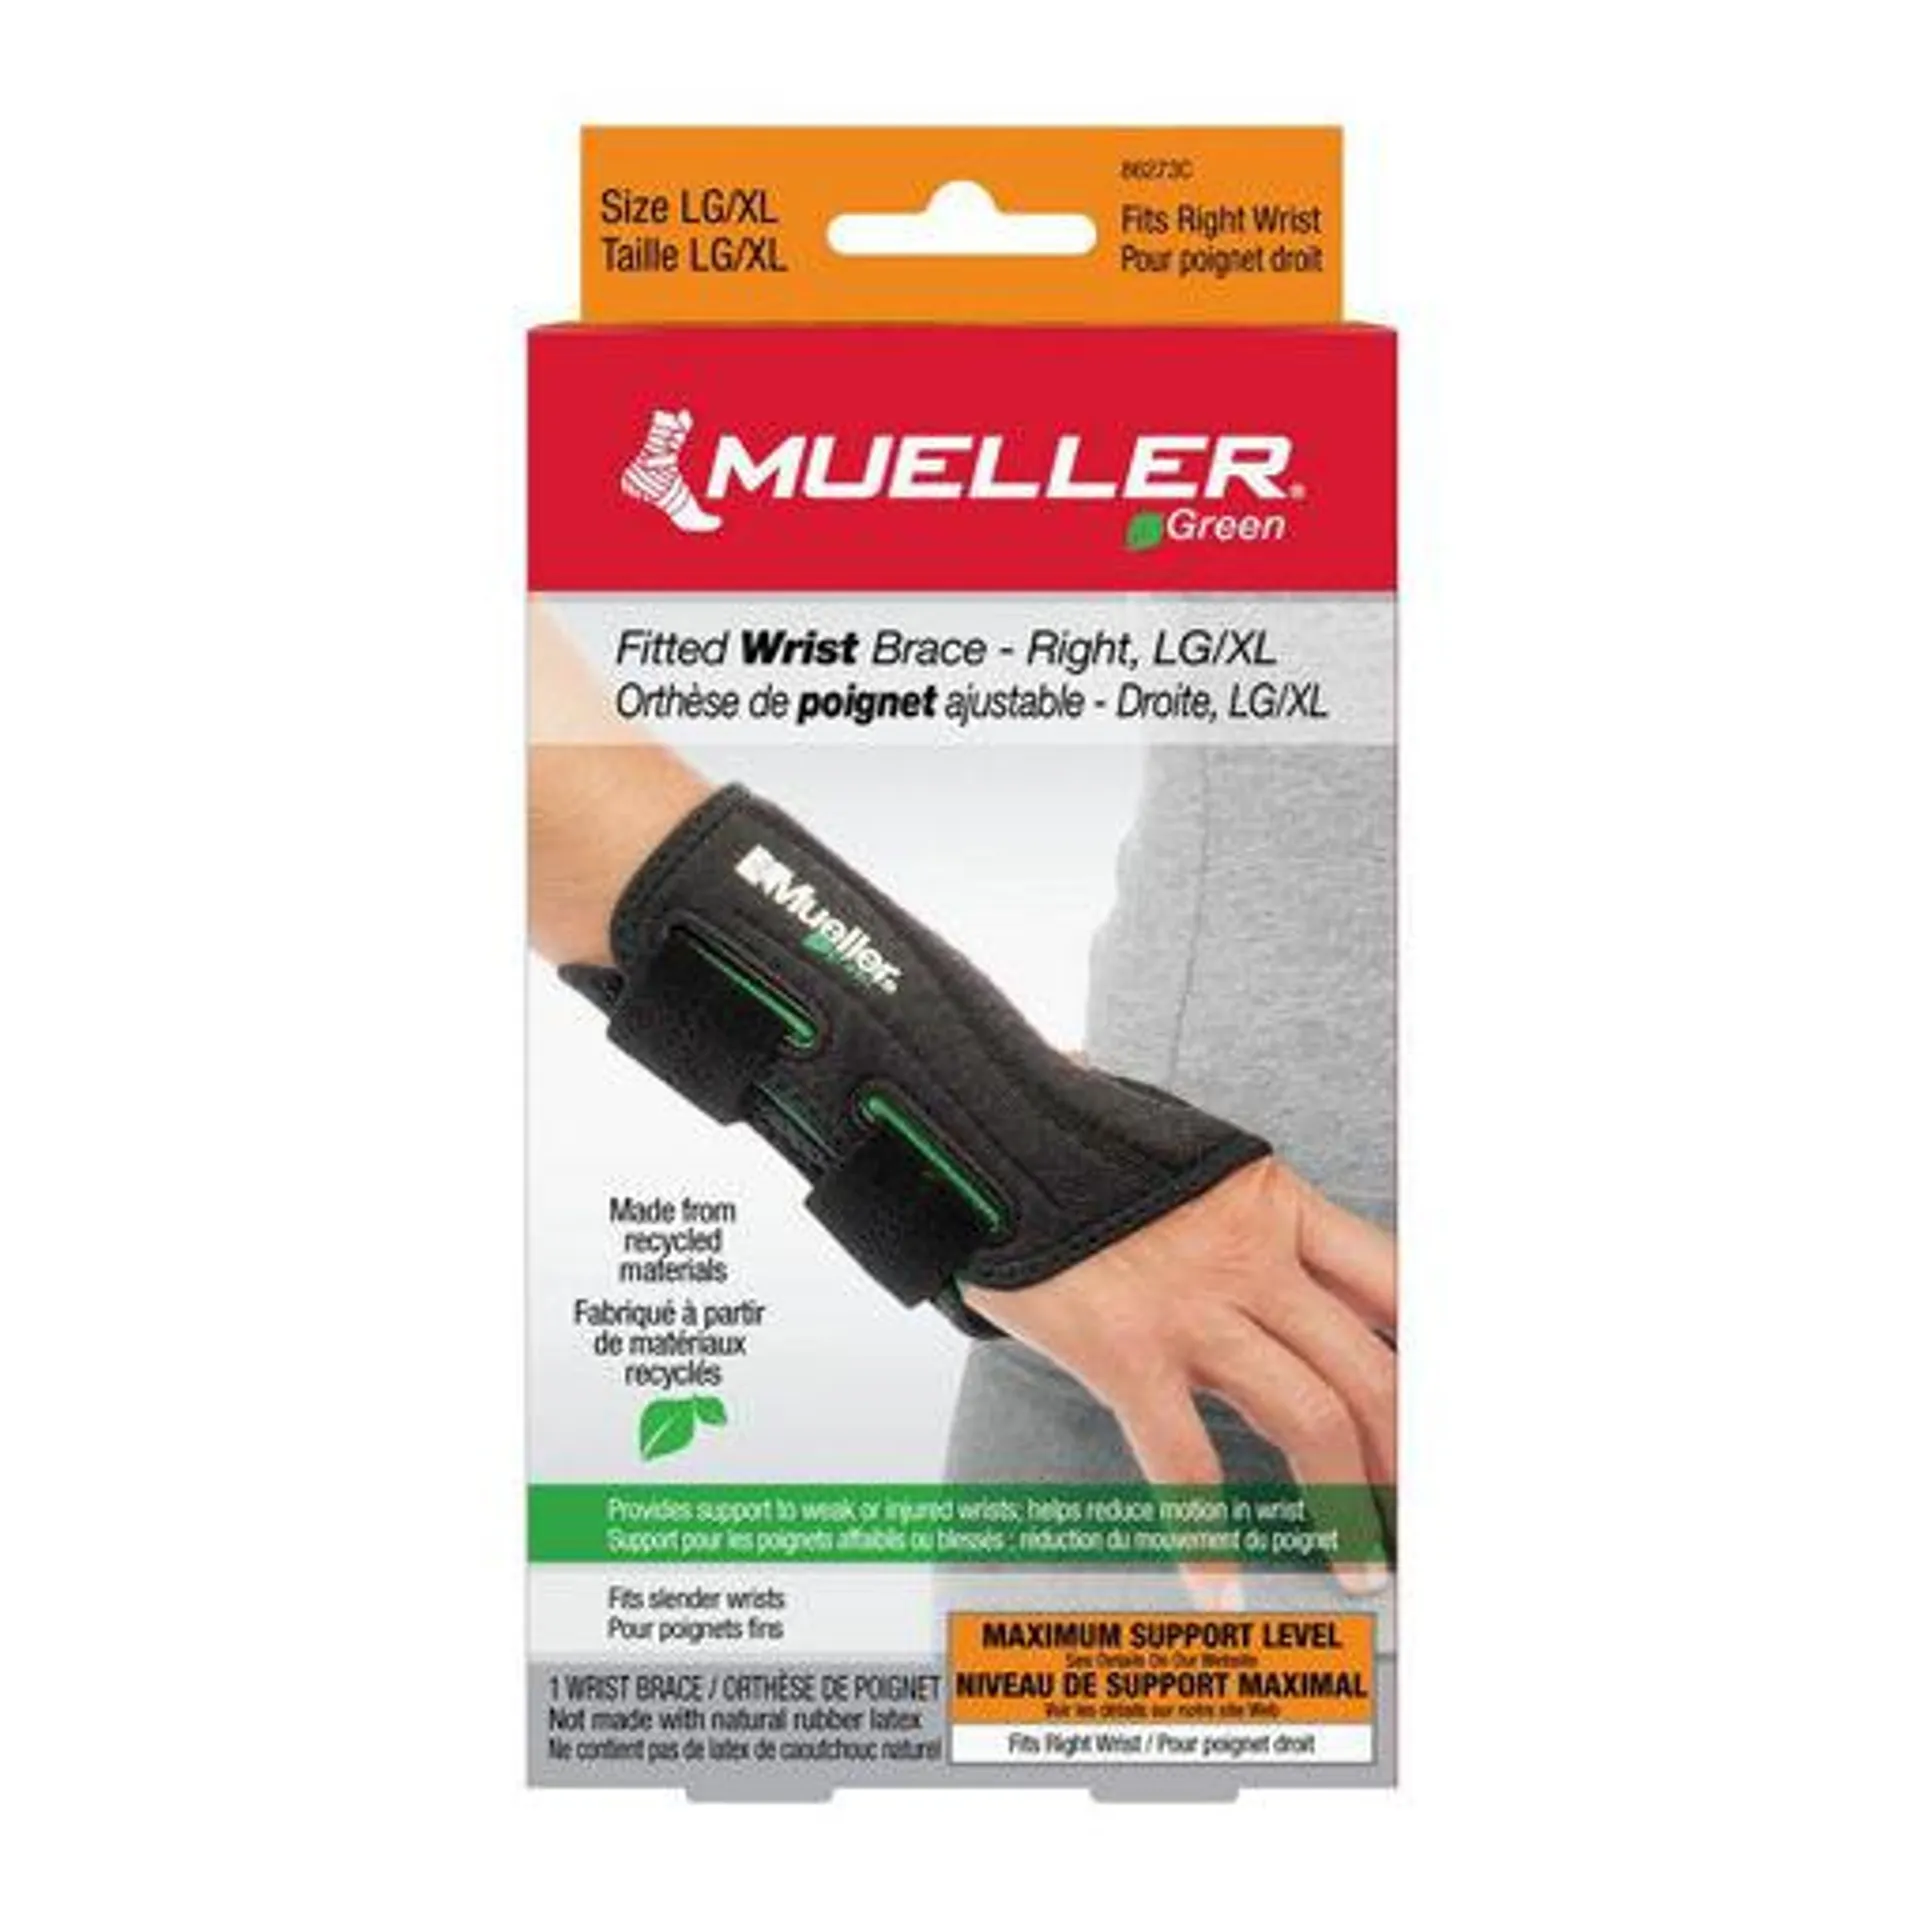 MUELLER GREEN WRIST BRACE - FITTED - RIGHT - LARGE/XLARGE